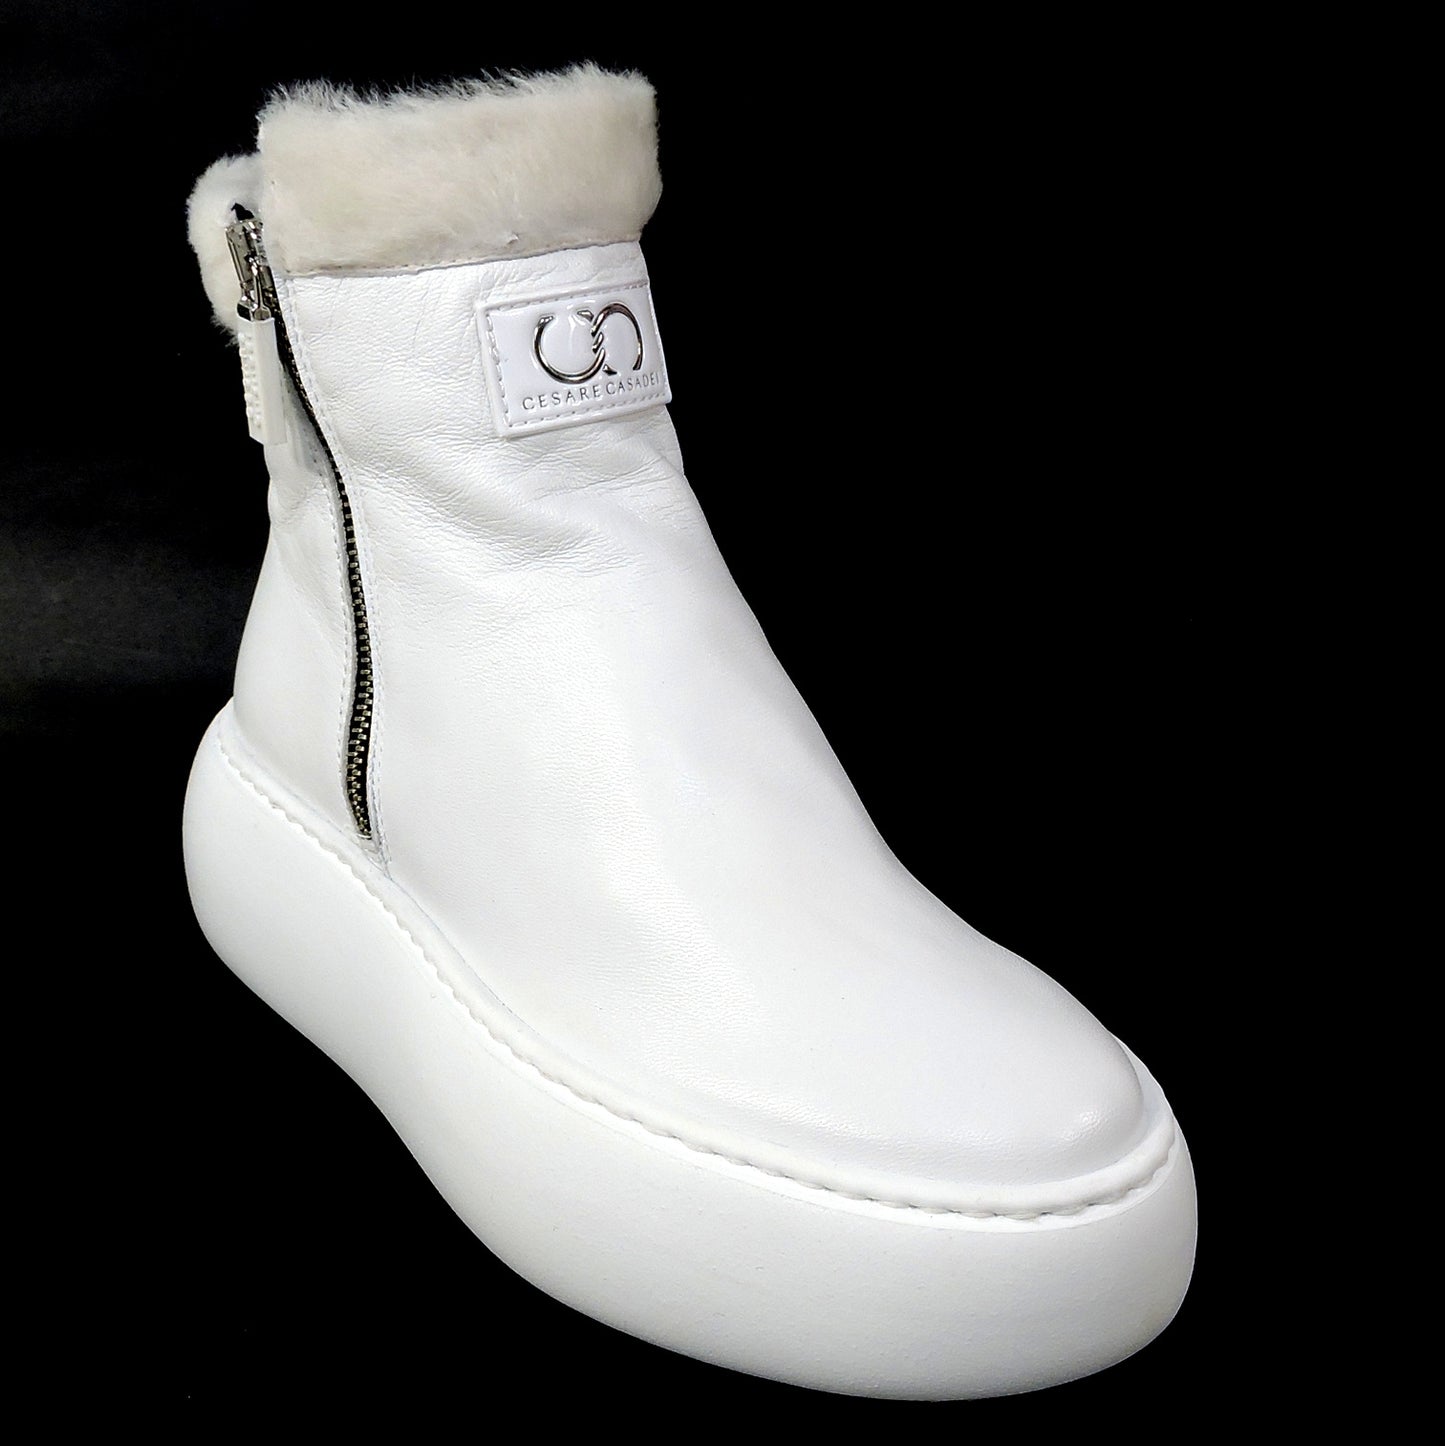 CASADEI 🇮🇹 WOMEN'S WHITE SOFT LEATHER COMFORT WINTER ANKLE BOOTIE